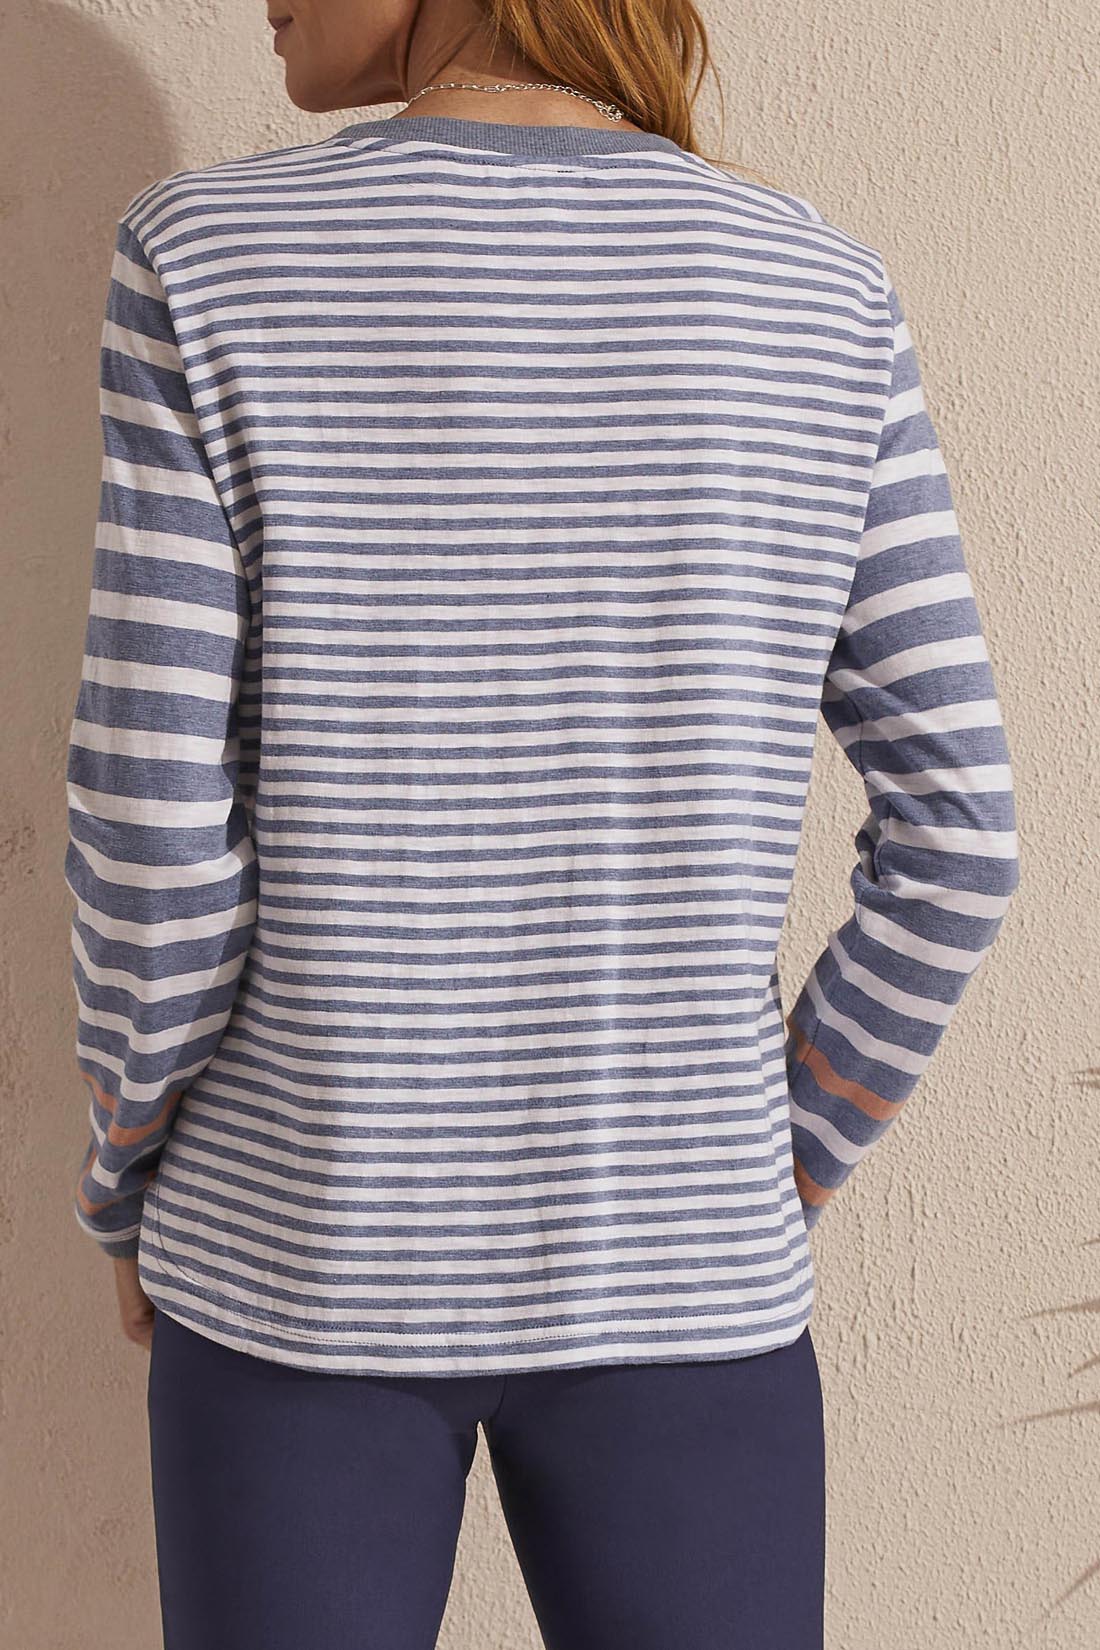 Tribal L/S Top w/Combo Stripes Chambray 16550-3704-0195